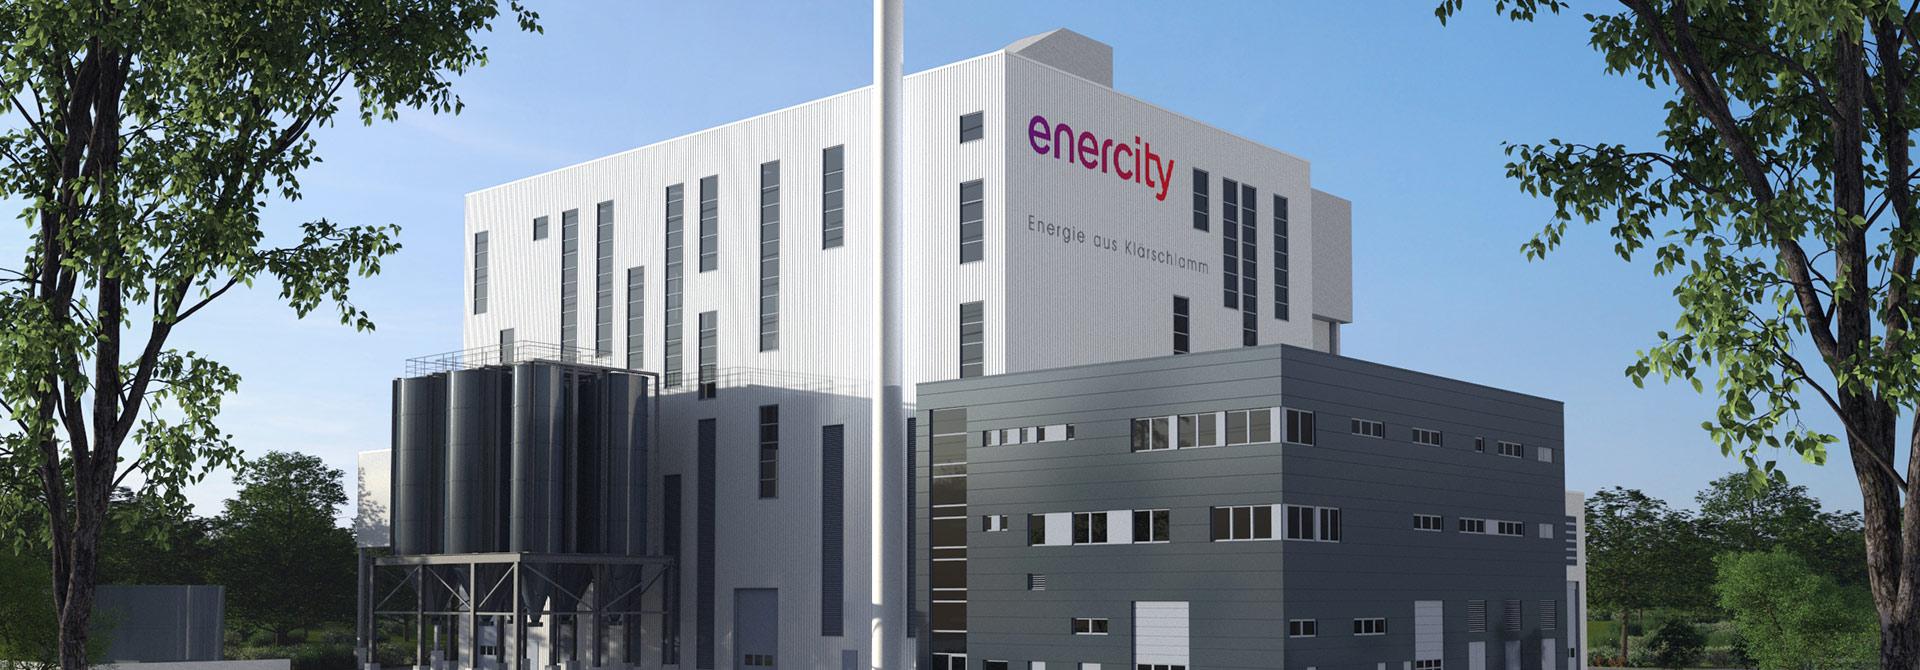 © enercity contracting